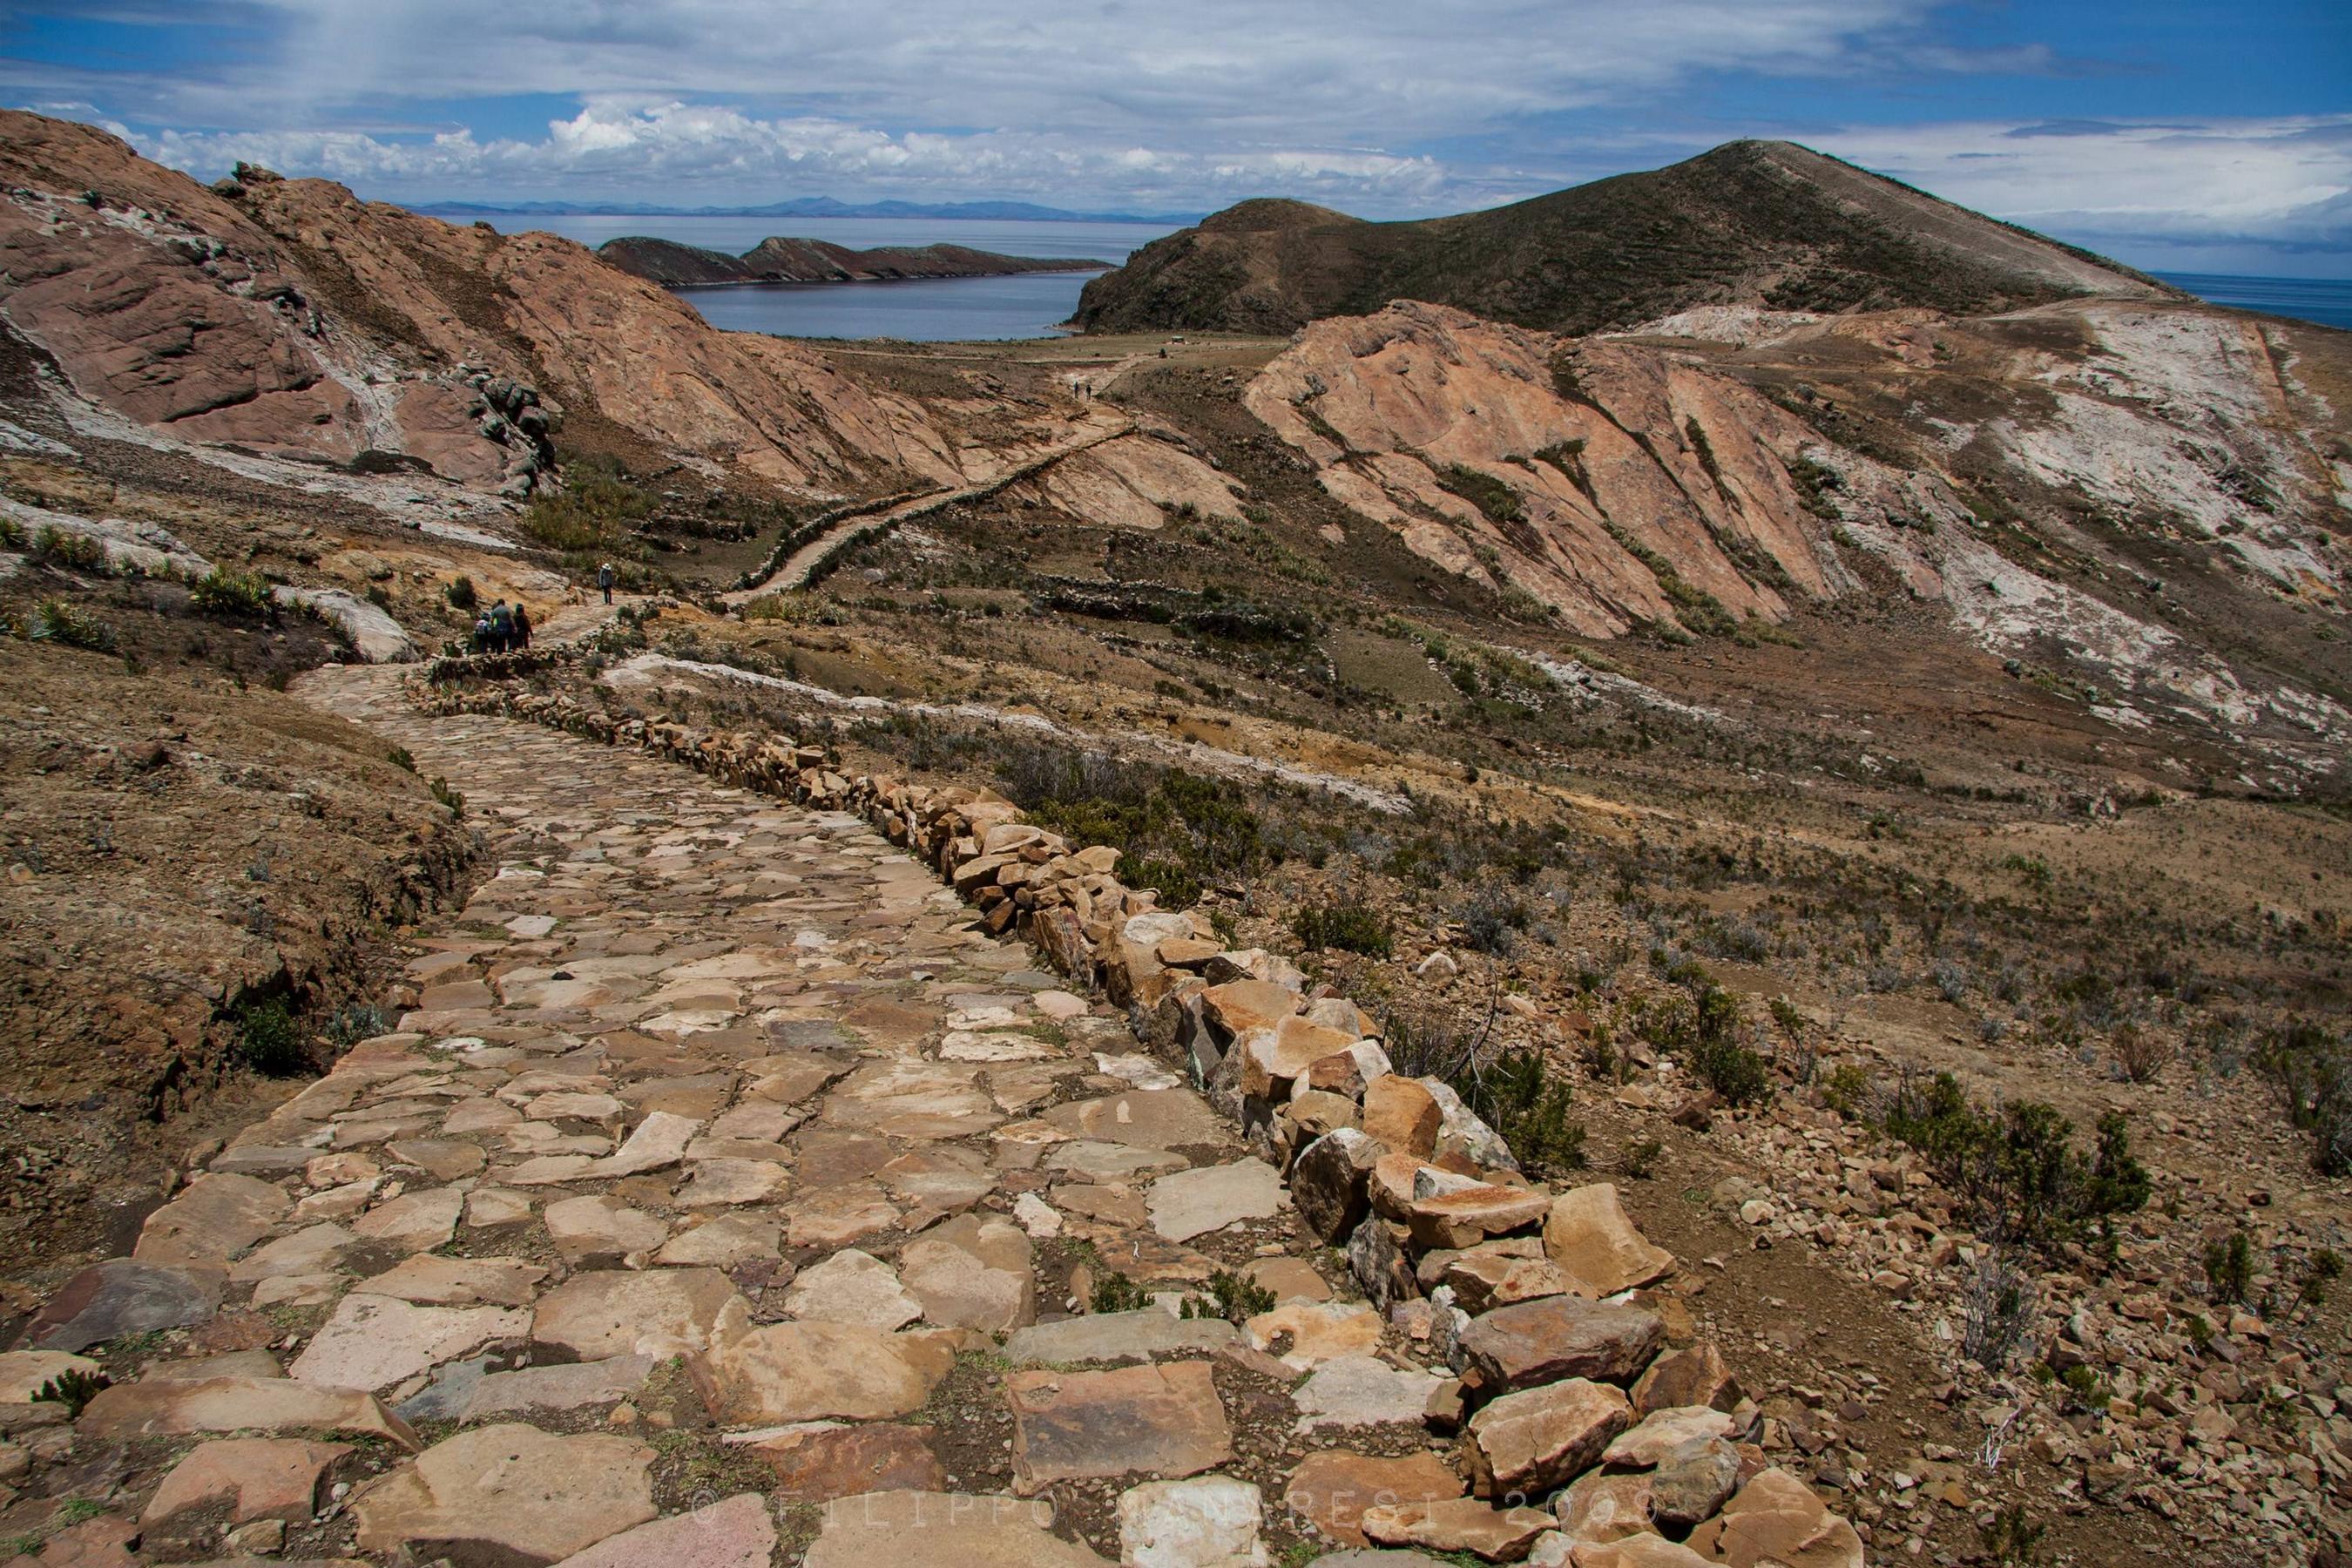 Inca trail, background and more